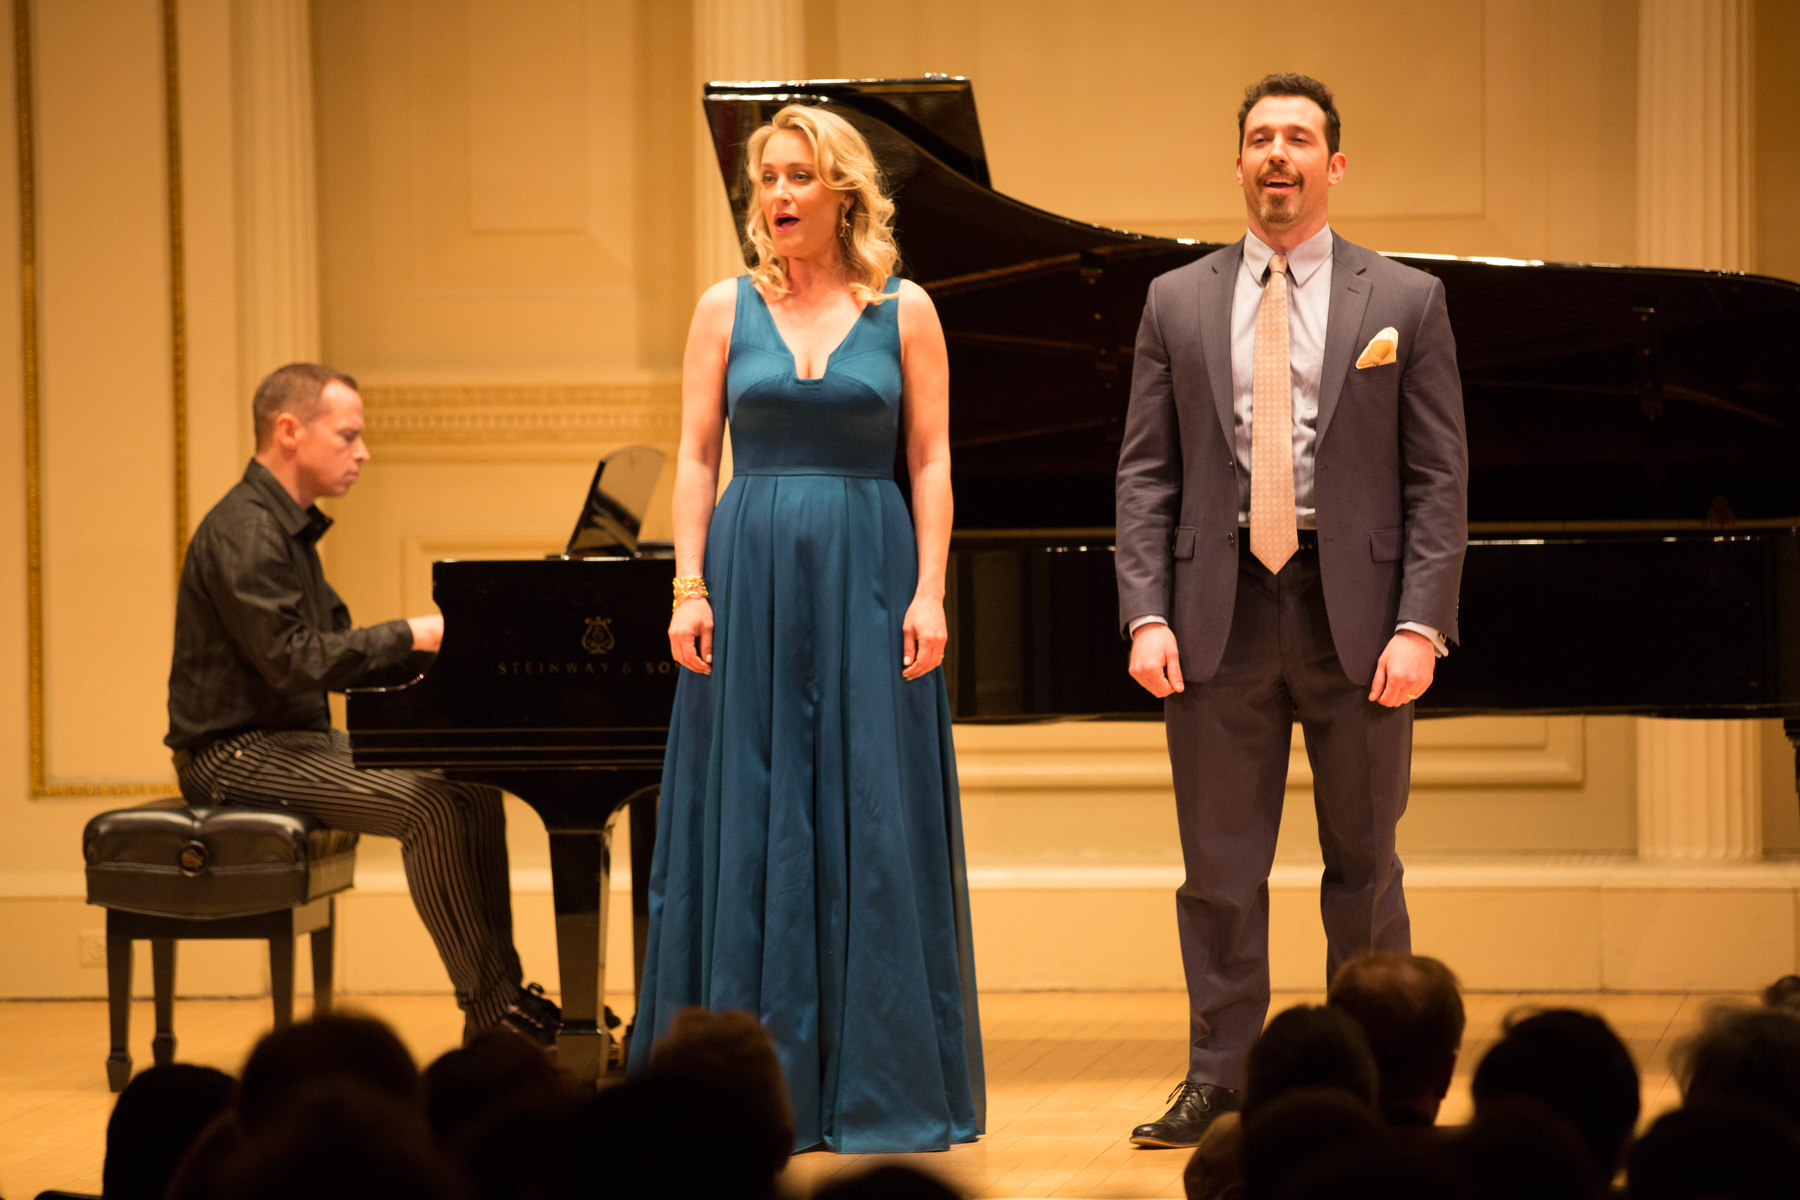 ame-2018-carnegie-hall-vocal-music-of-robert-patersonDG9A7864.jpg